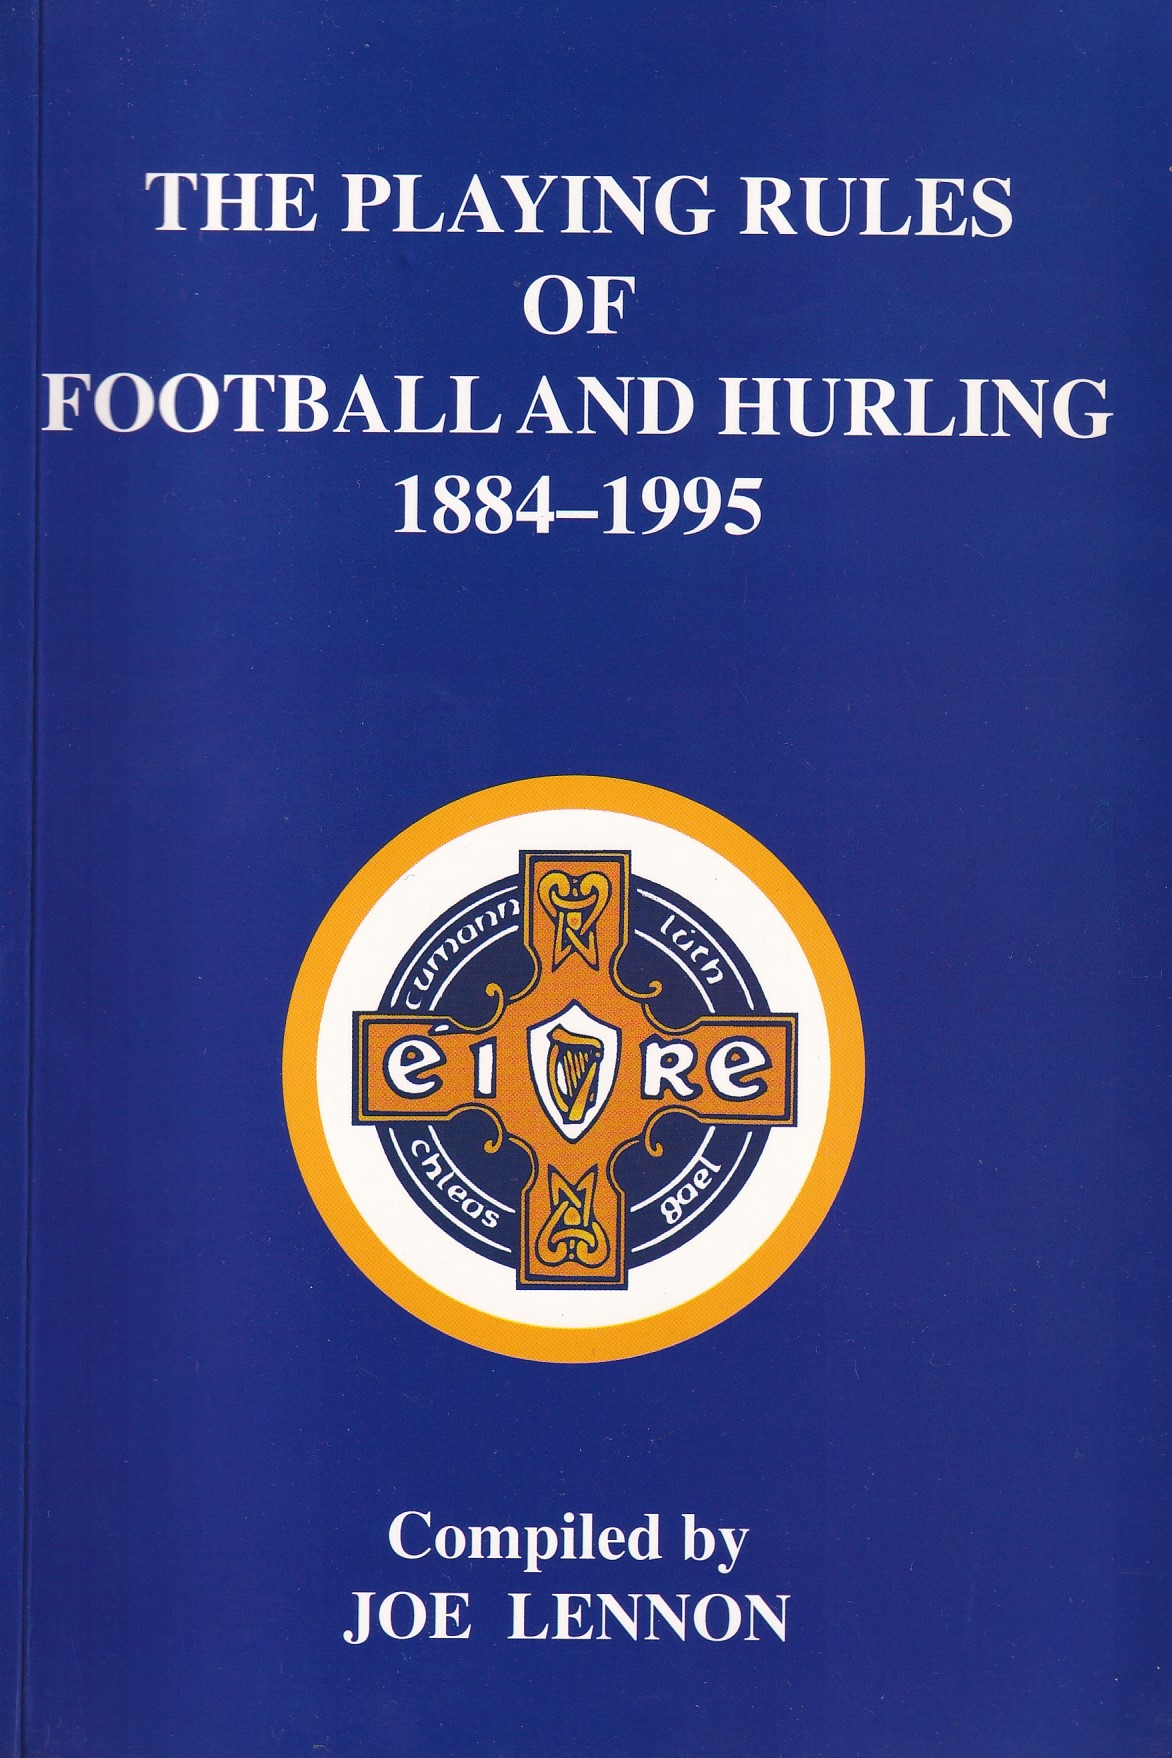 The Playing Rules of Football and Hurling 1884-1995 [SIGNED] | Joe Lennon | Charlie Byrne's